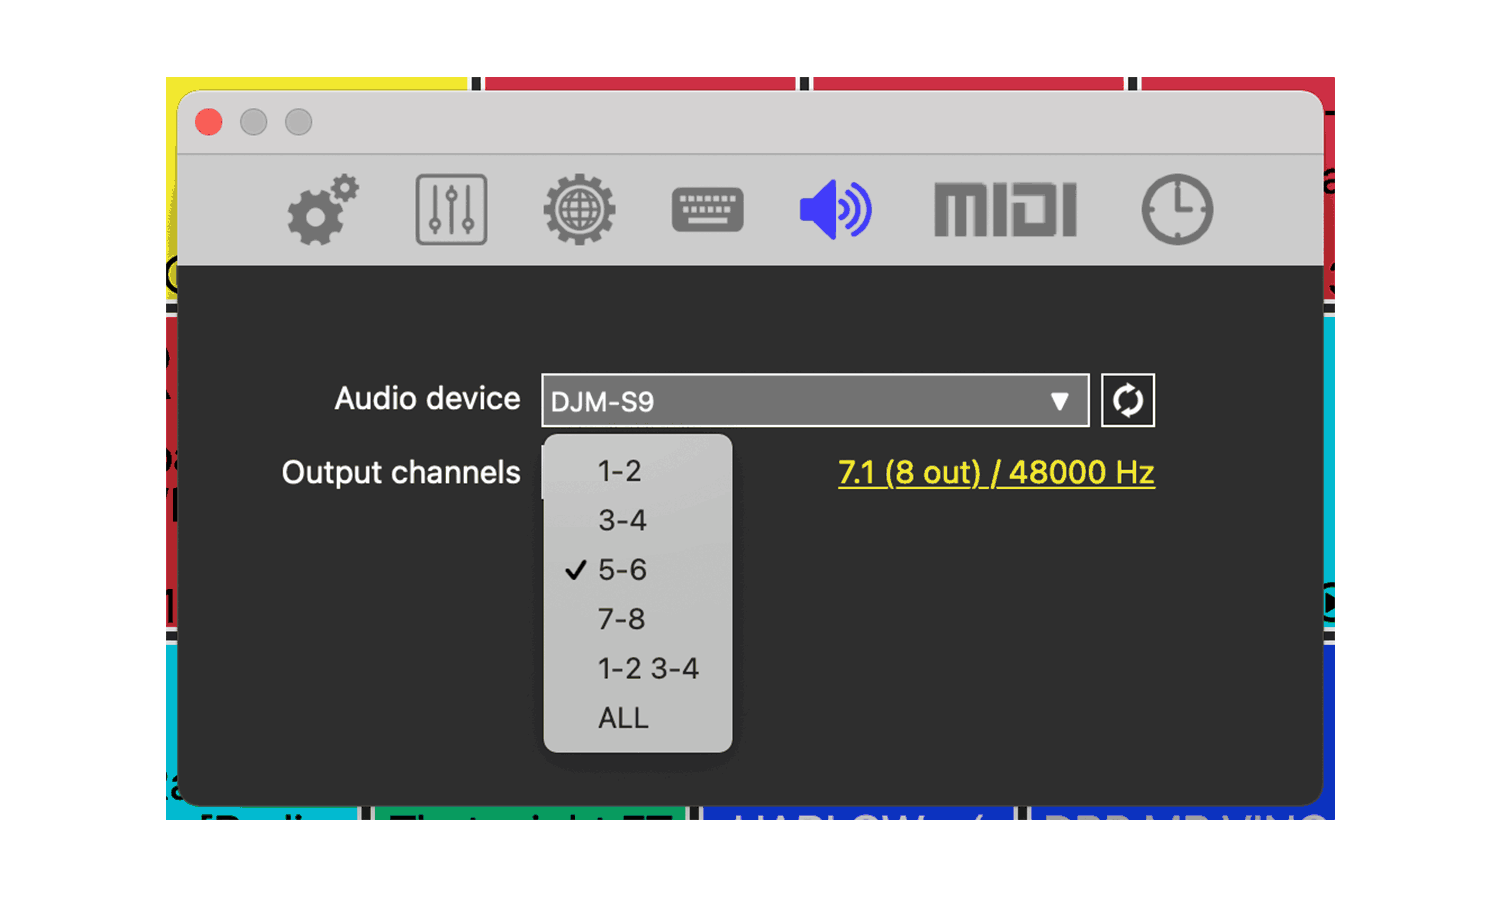 Multi channel audio devices support in KueIt